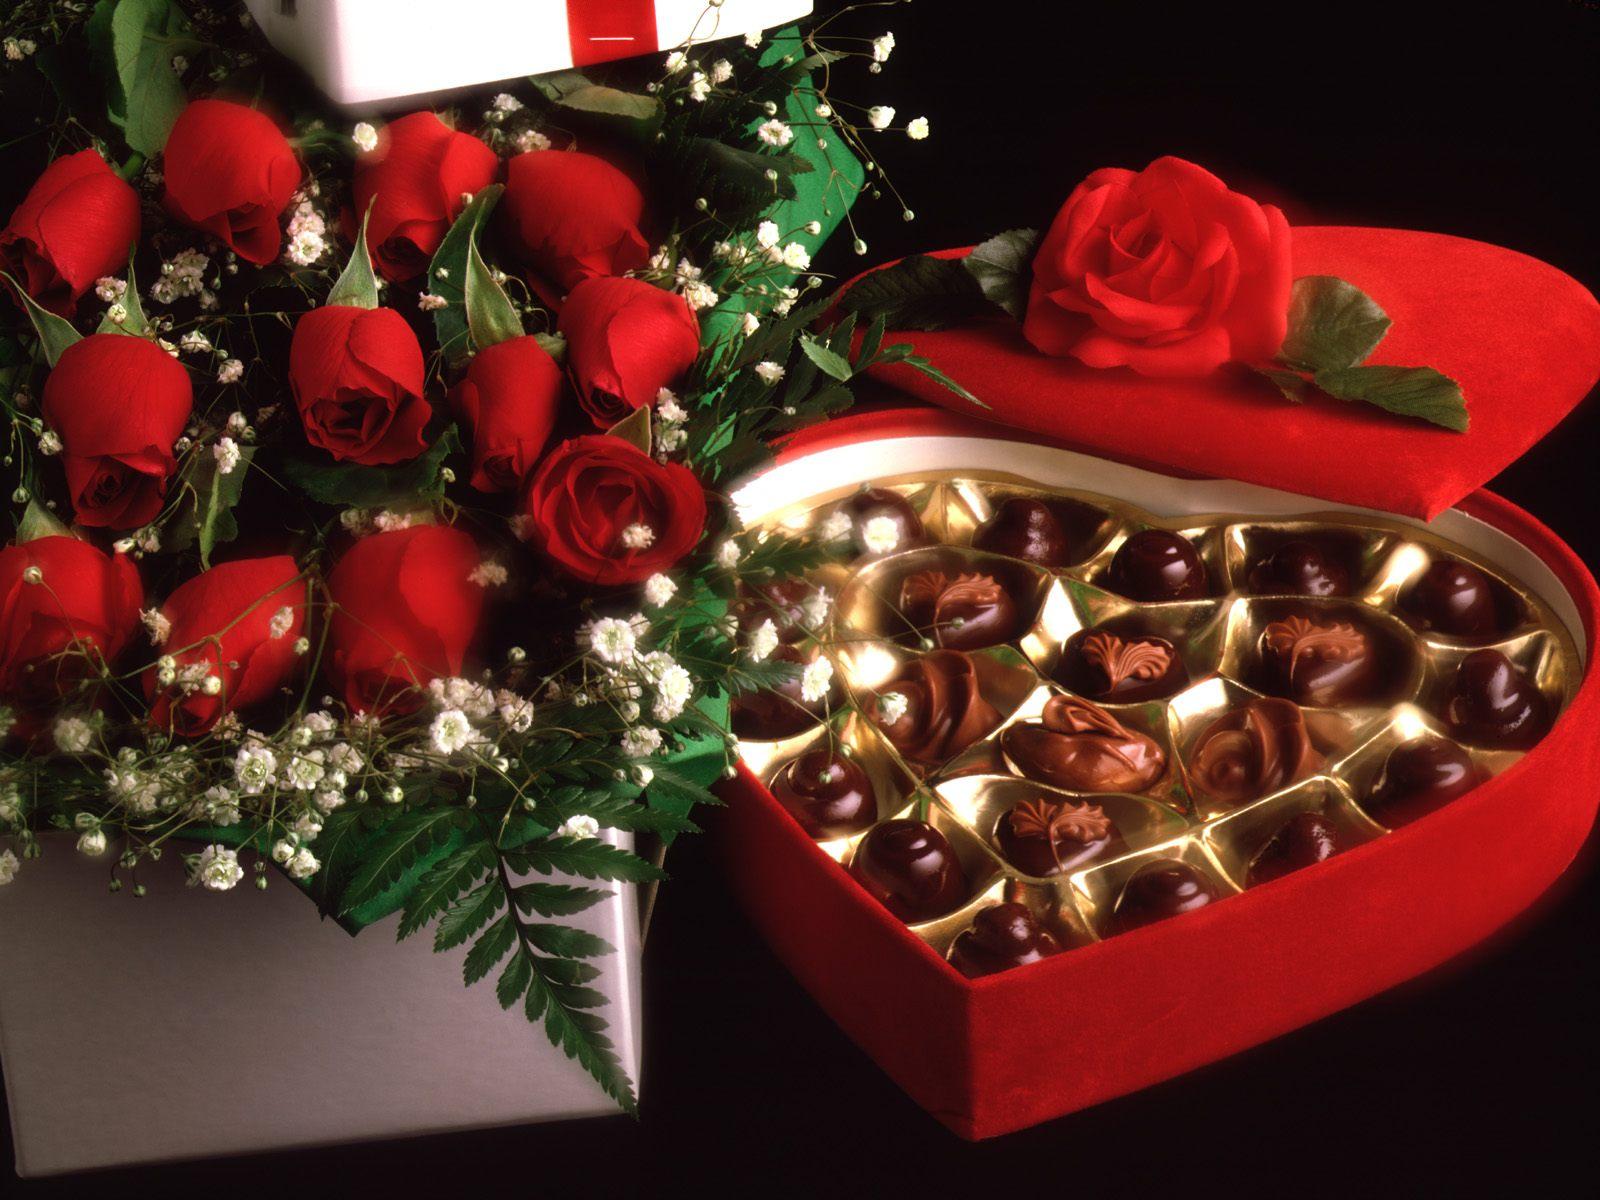 Chocolate Day Hd Wallpapers - Romantic Happy Chocolate Day - HD Wallpaper 